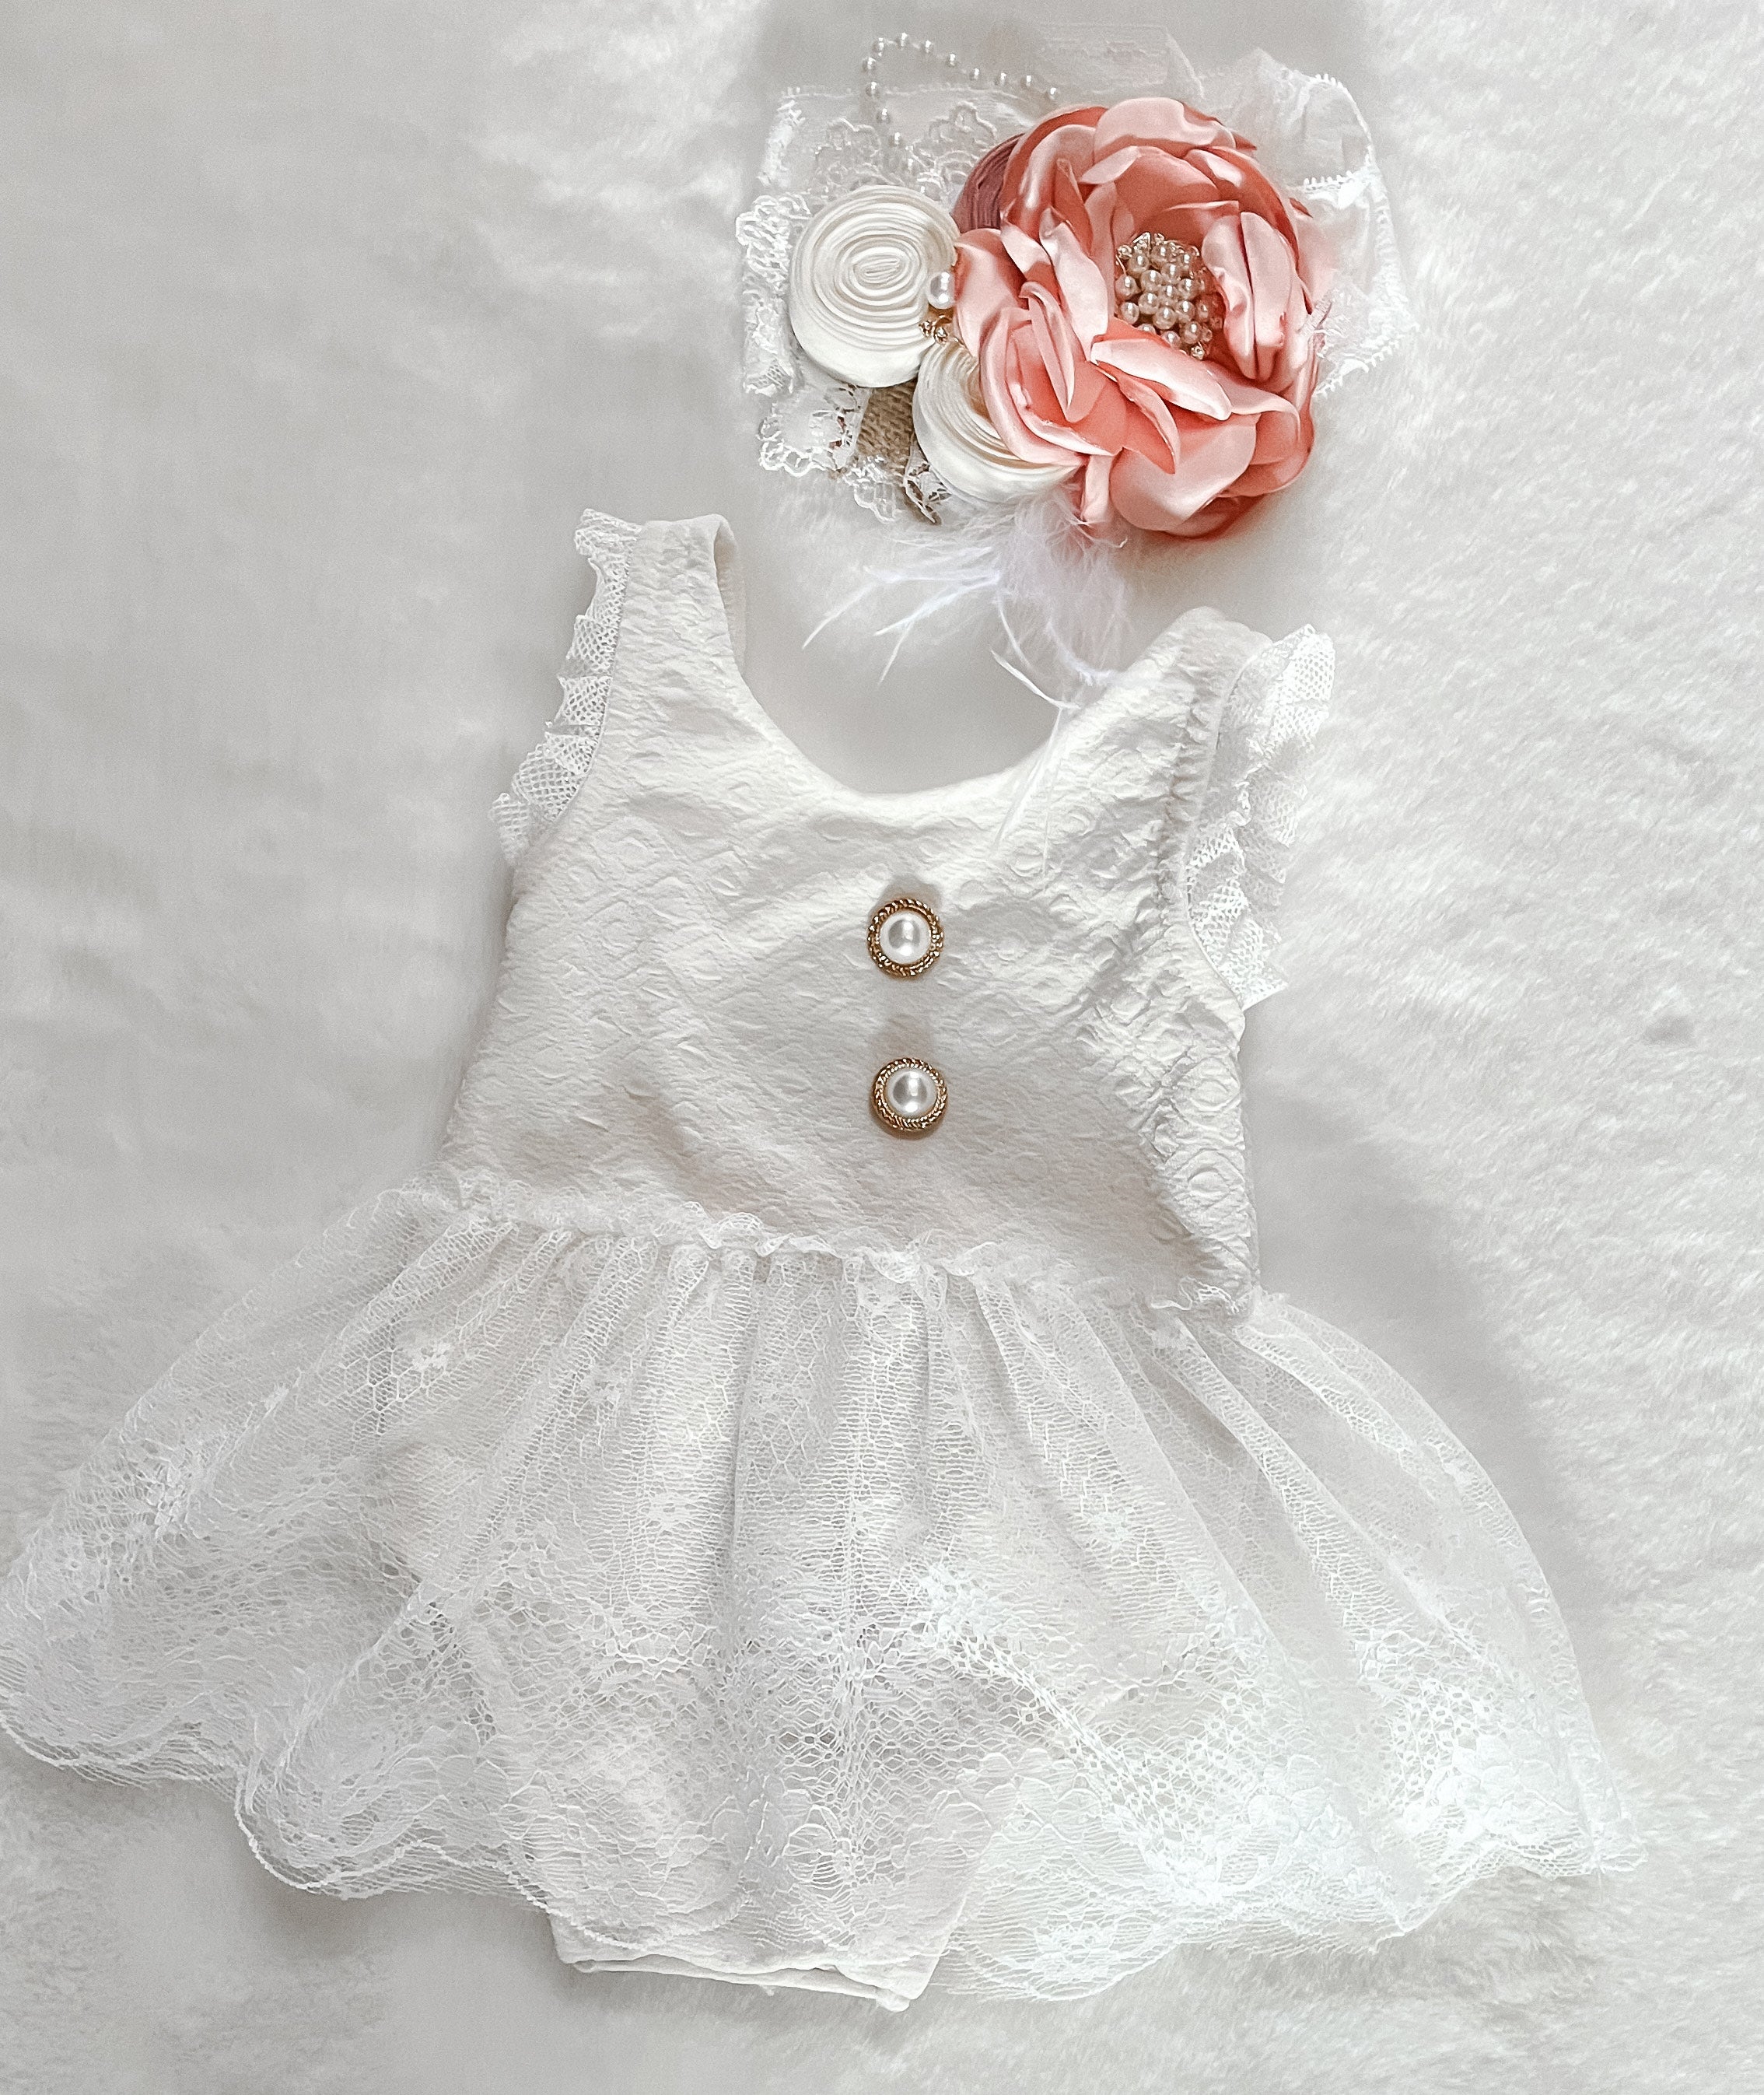 Baby Girls White Lace Sleeveless Skirted Romper with Pearl Button Details